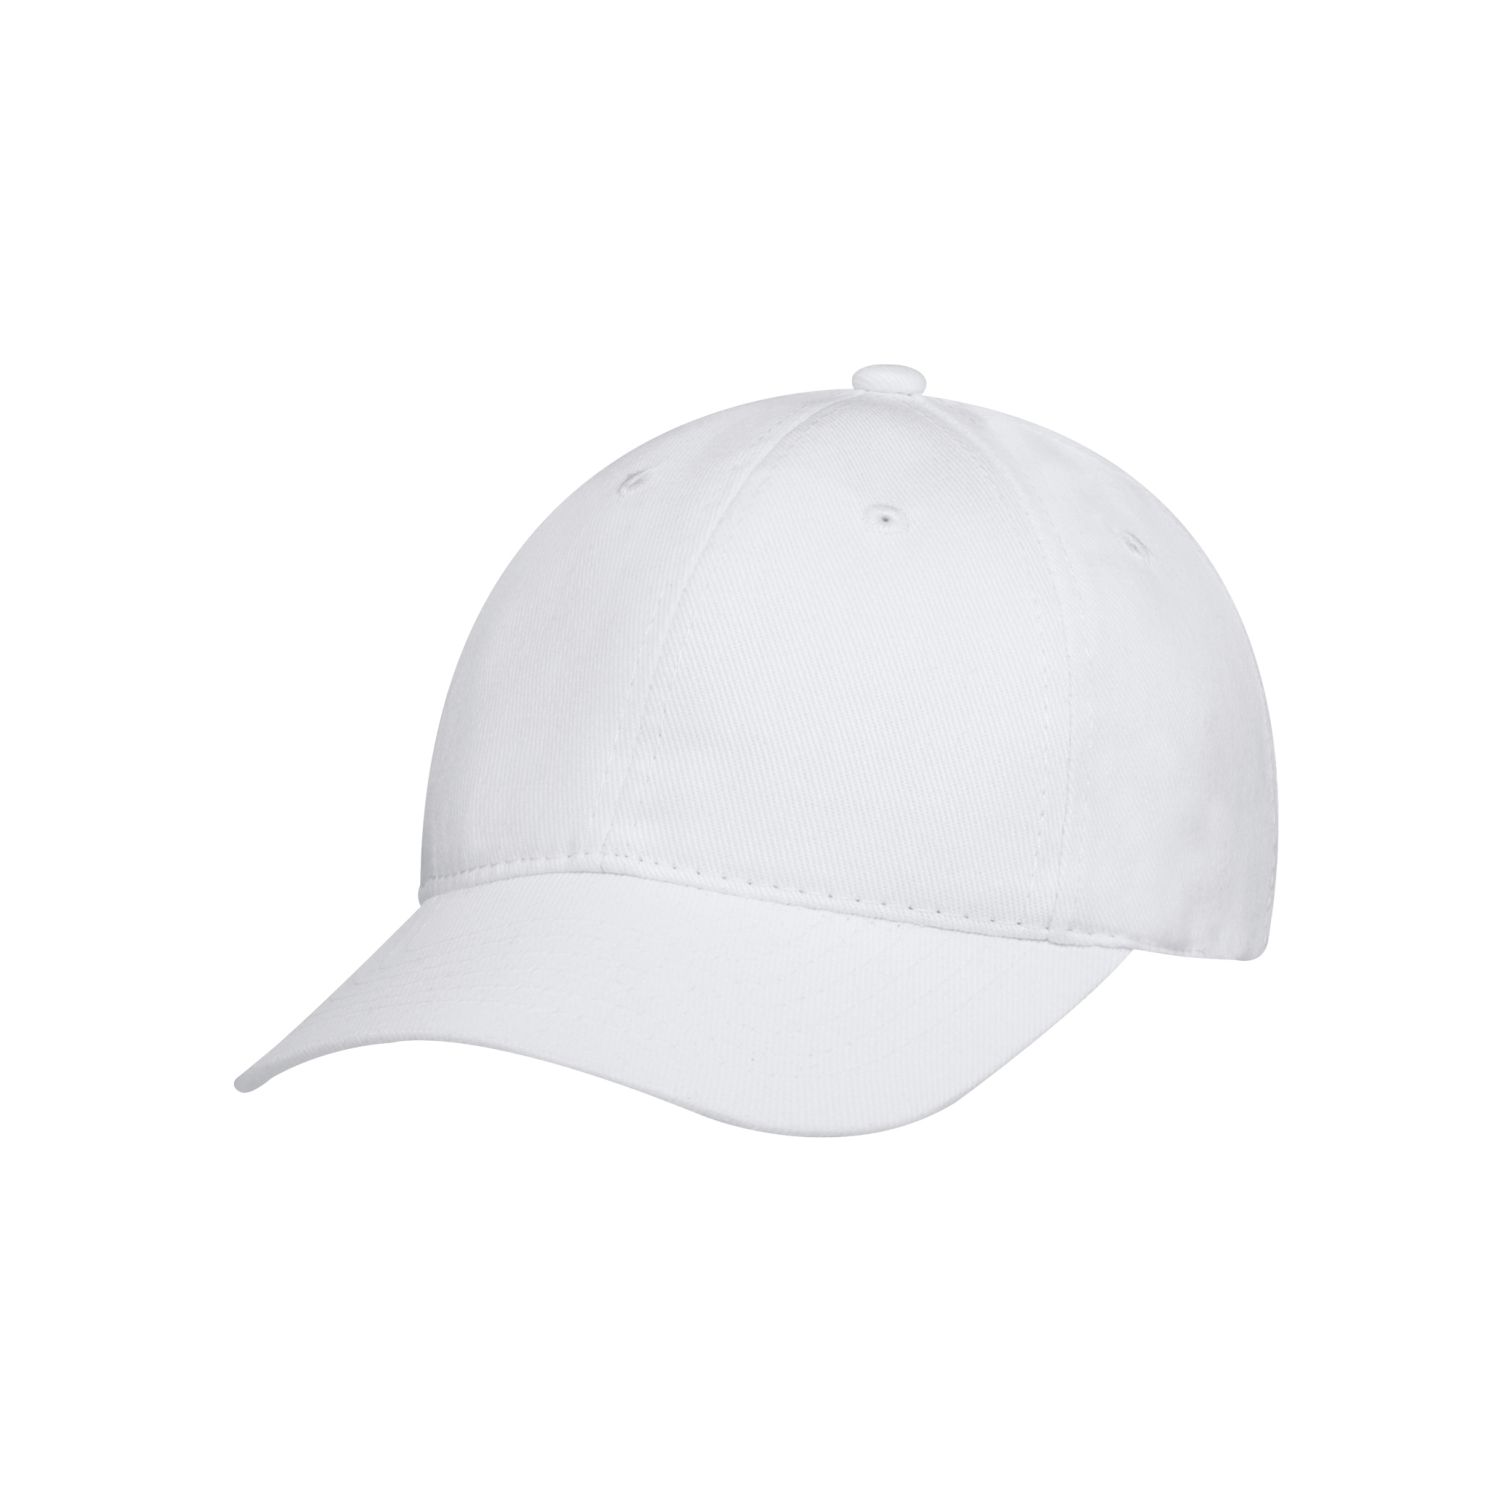 AJM Heavyweight Brushed Cotton Drill 6 Panel Constructed Contour Hat #2C390M White